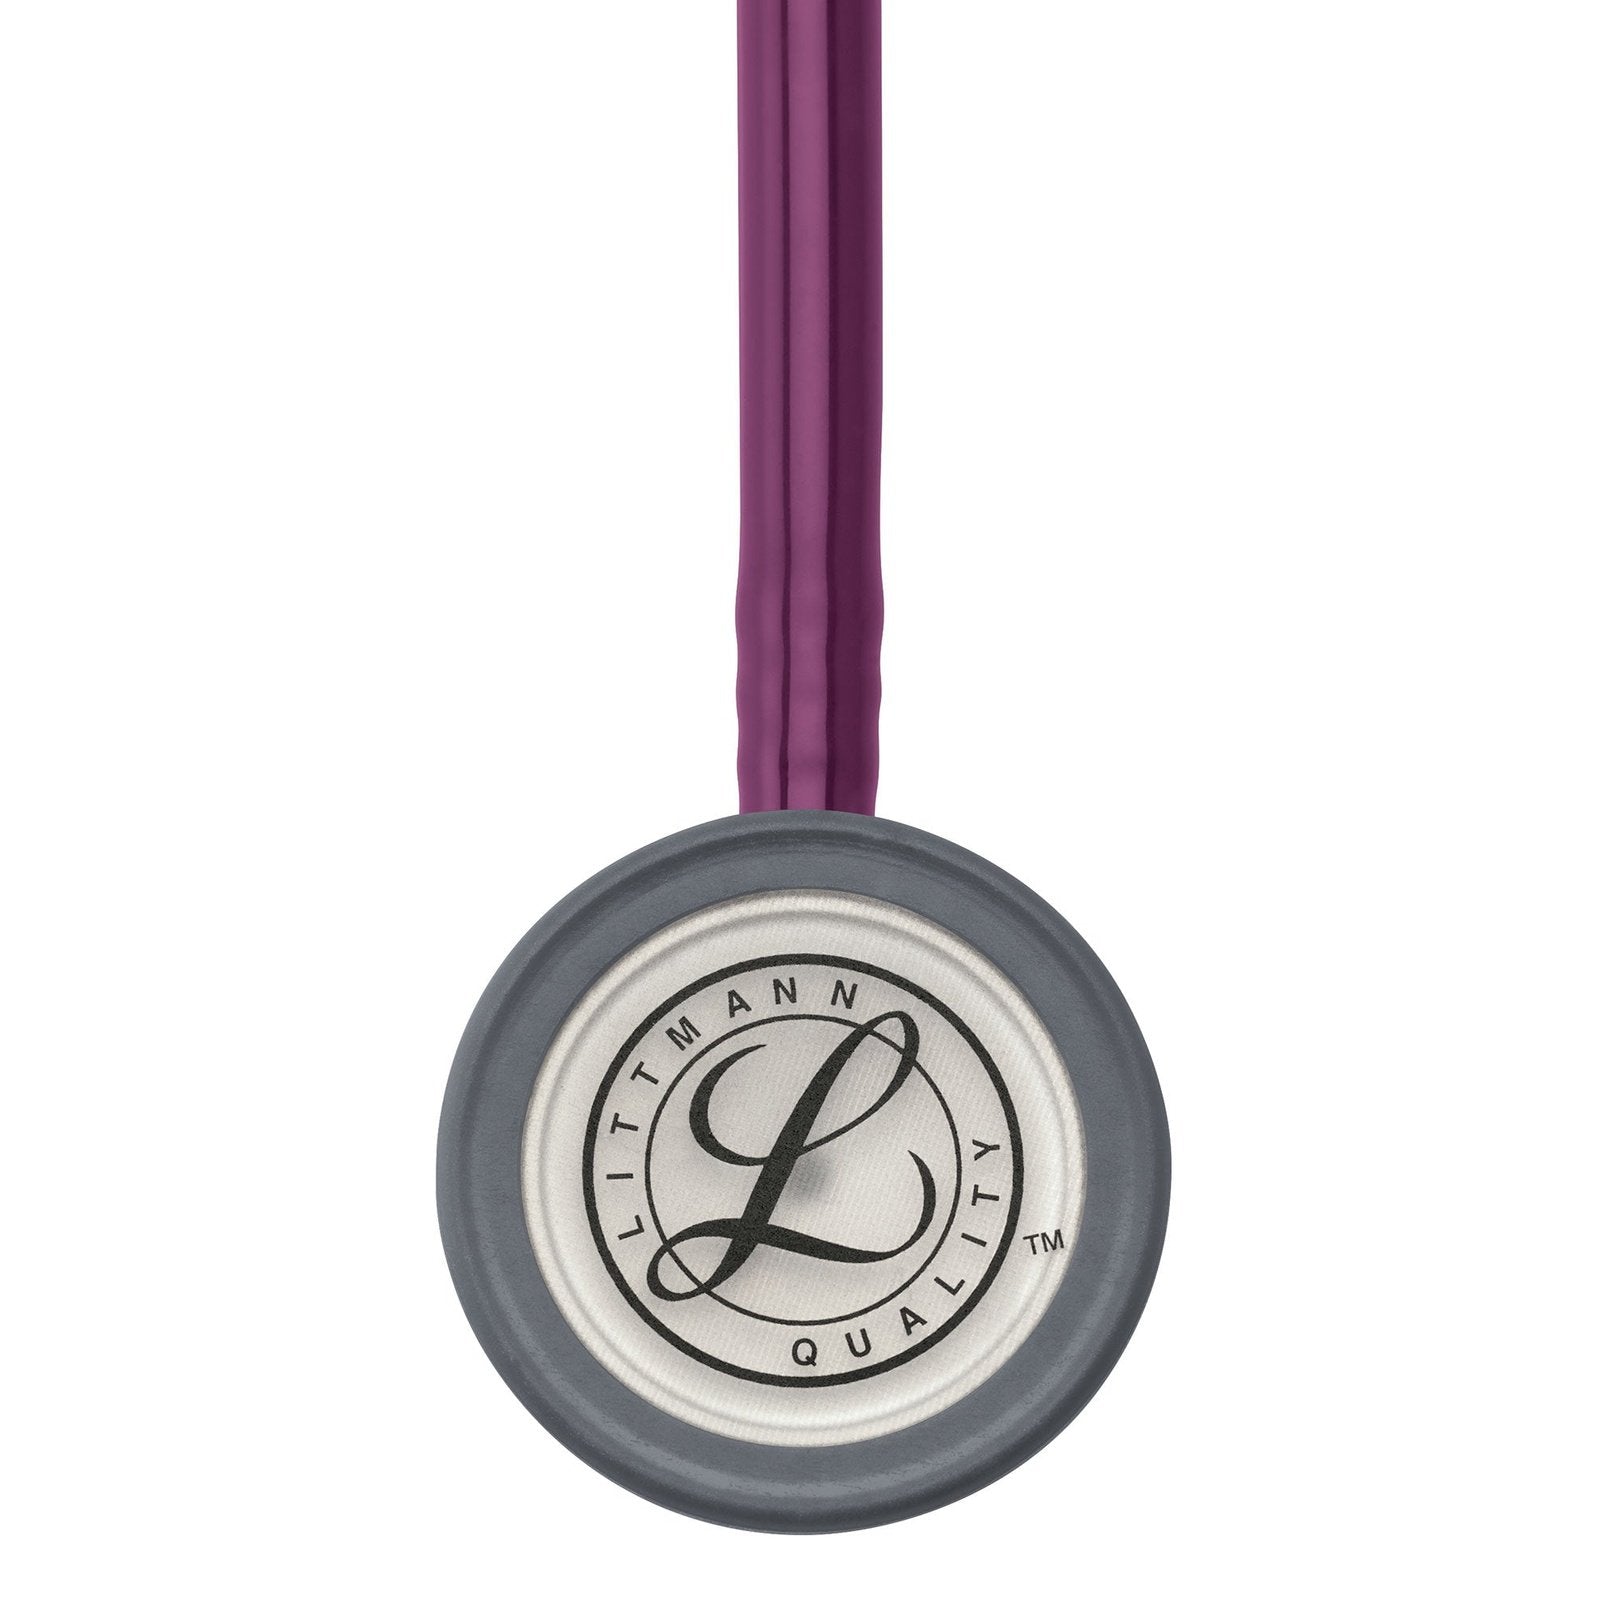 Prestige Medical Clinical Lite Stethoscope, Purple, 31 Inch (Pack of 1)